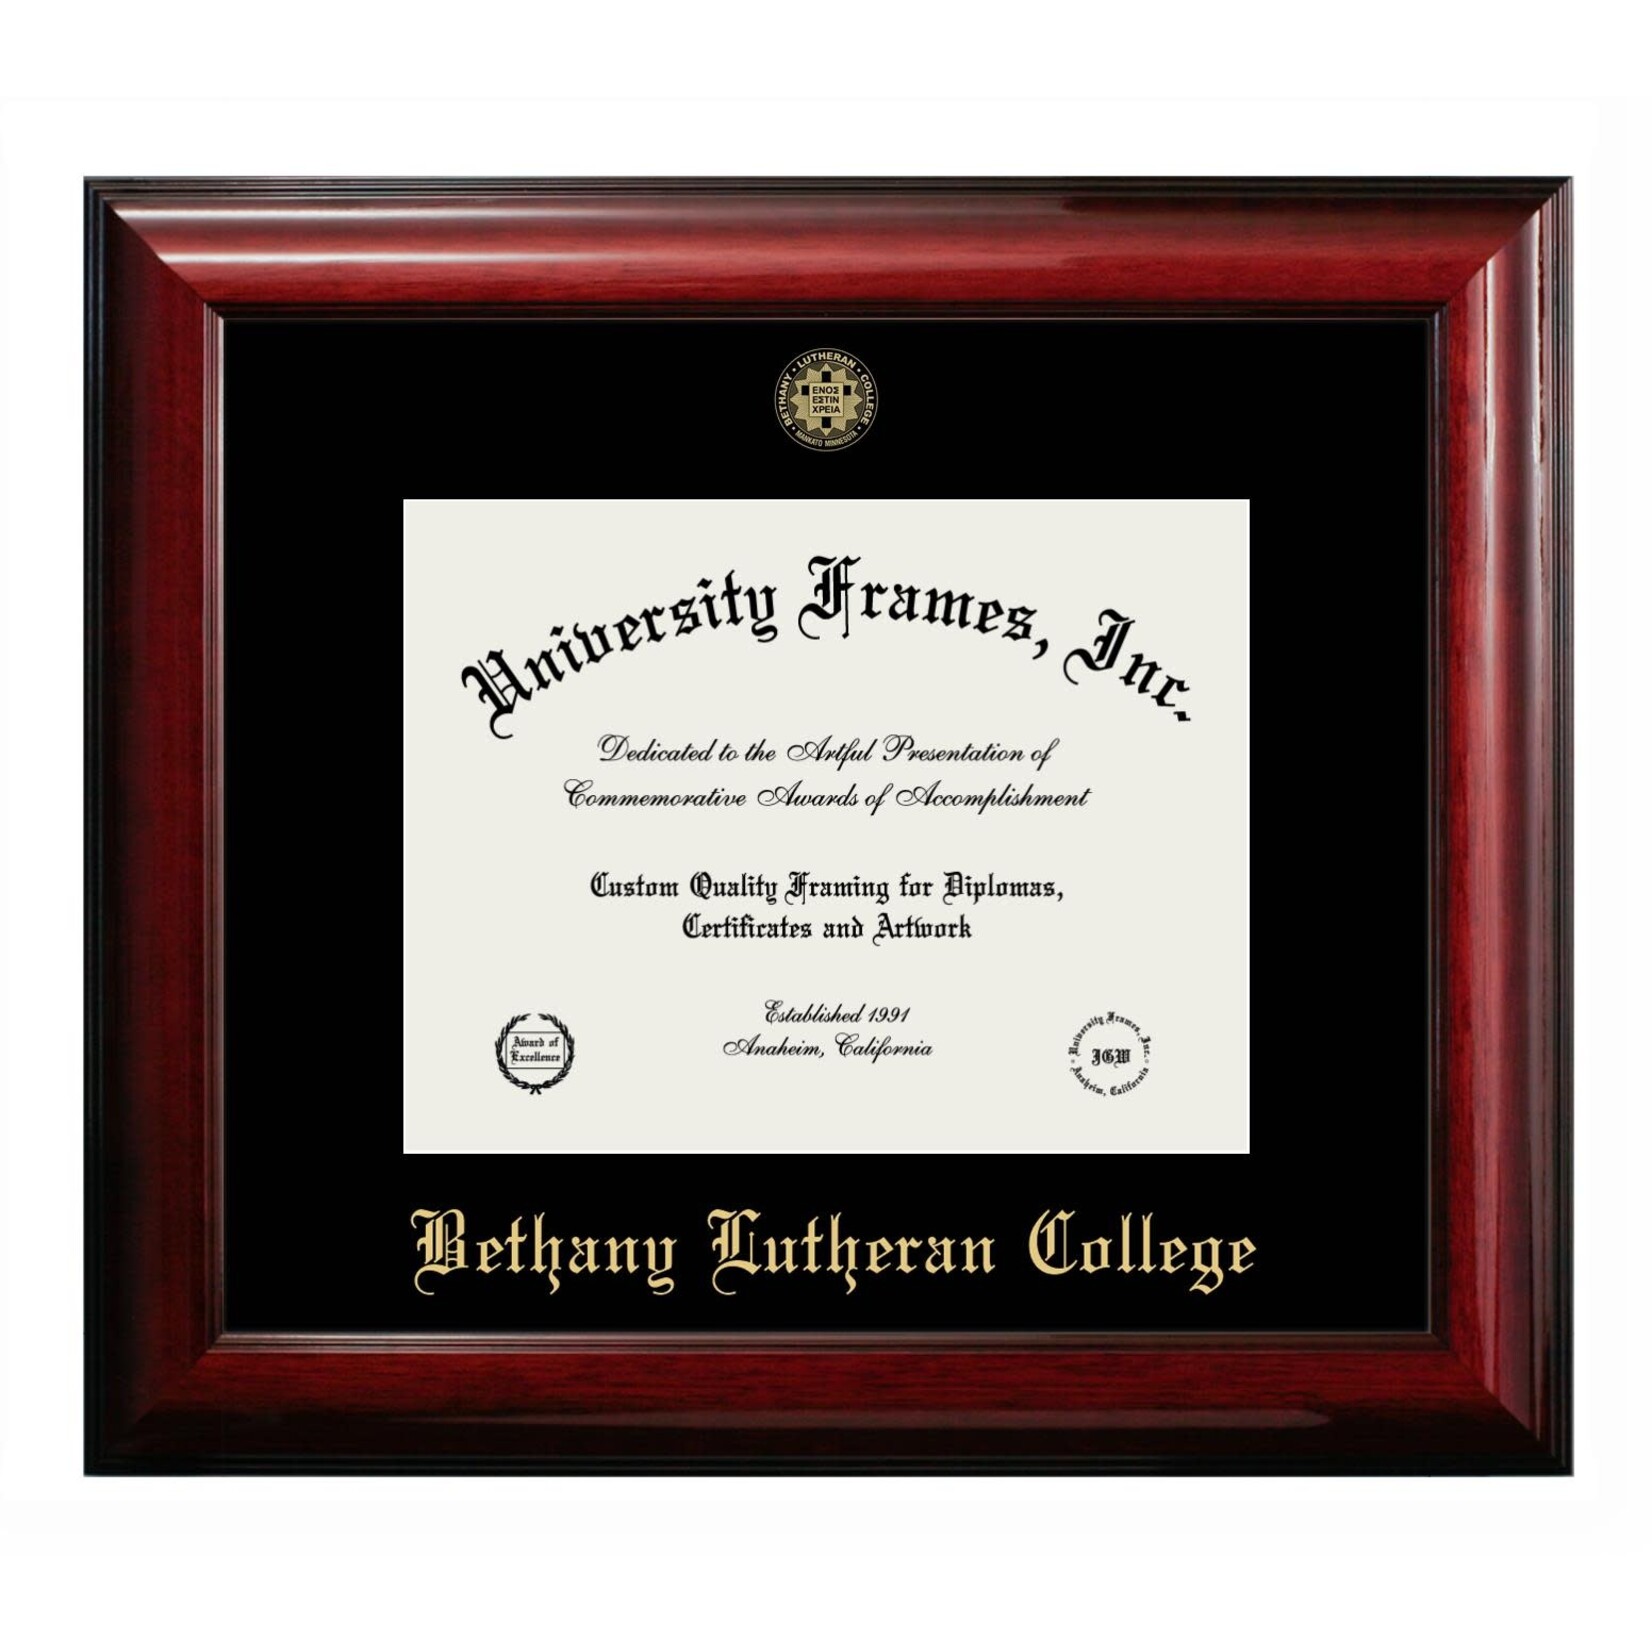 Bethany Lutheran College Diploma Frame - Classic